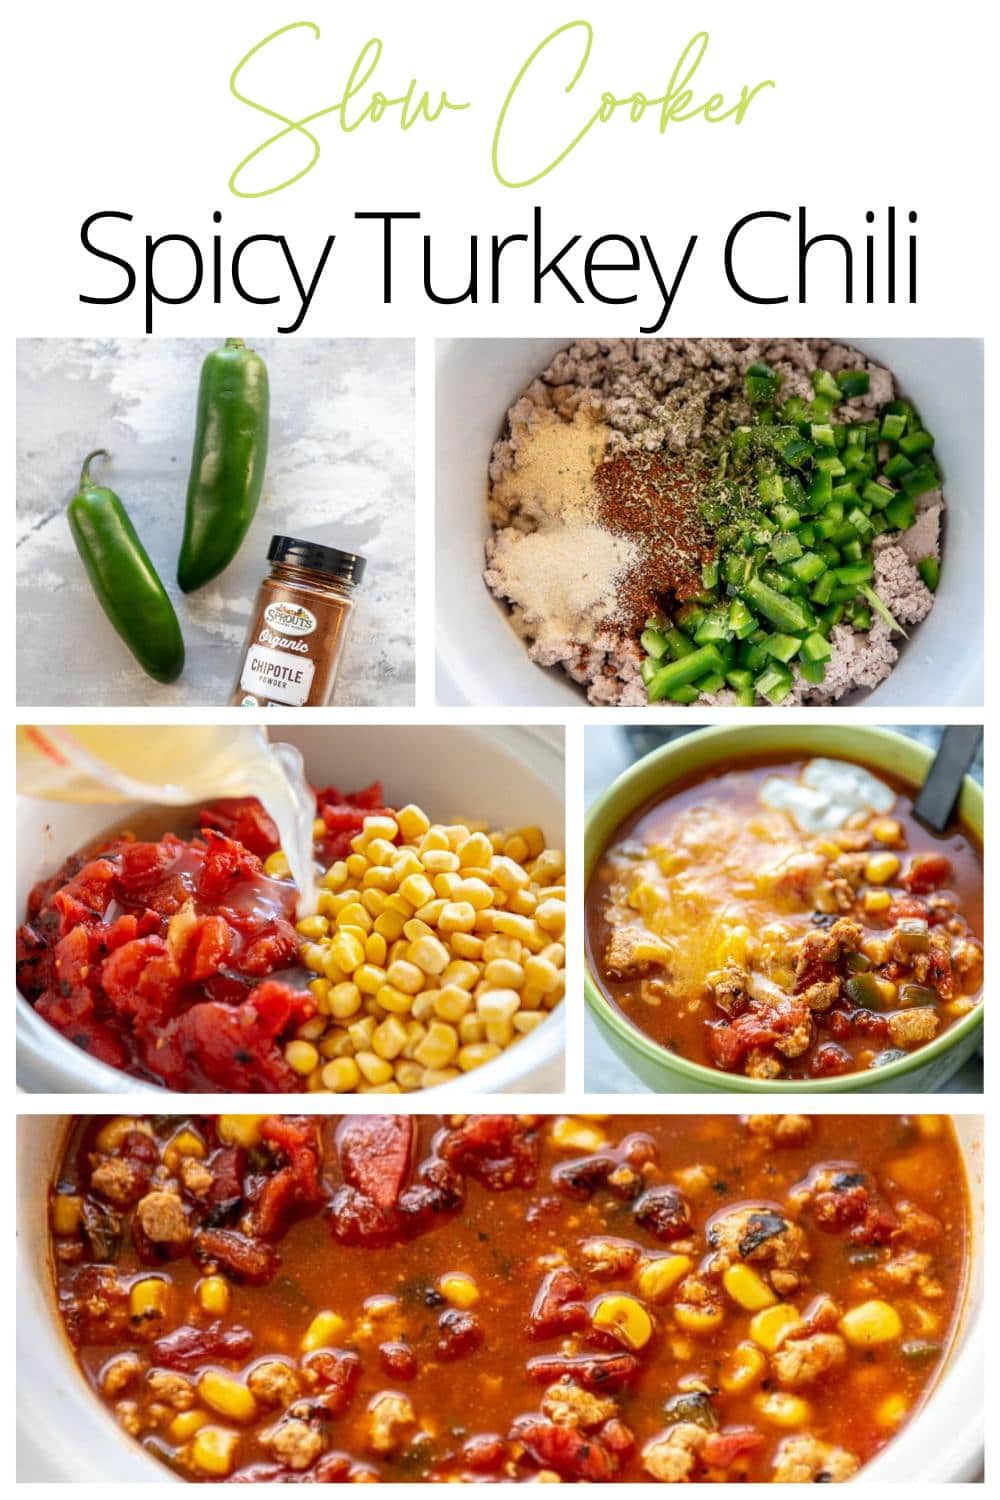 Slow Cooker Spicy Turkey Chili Slow Cooker Gourmet